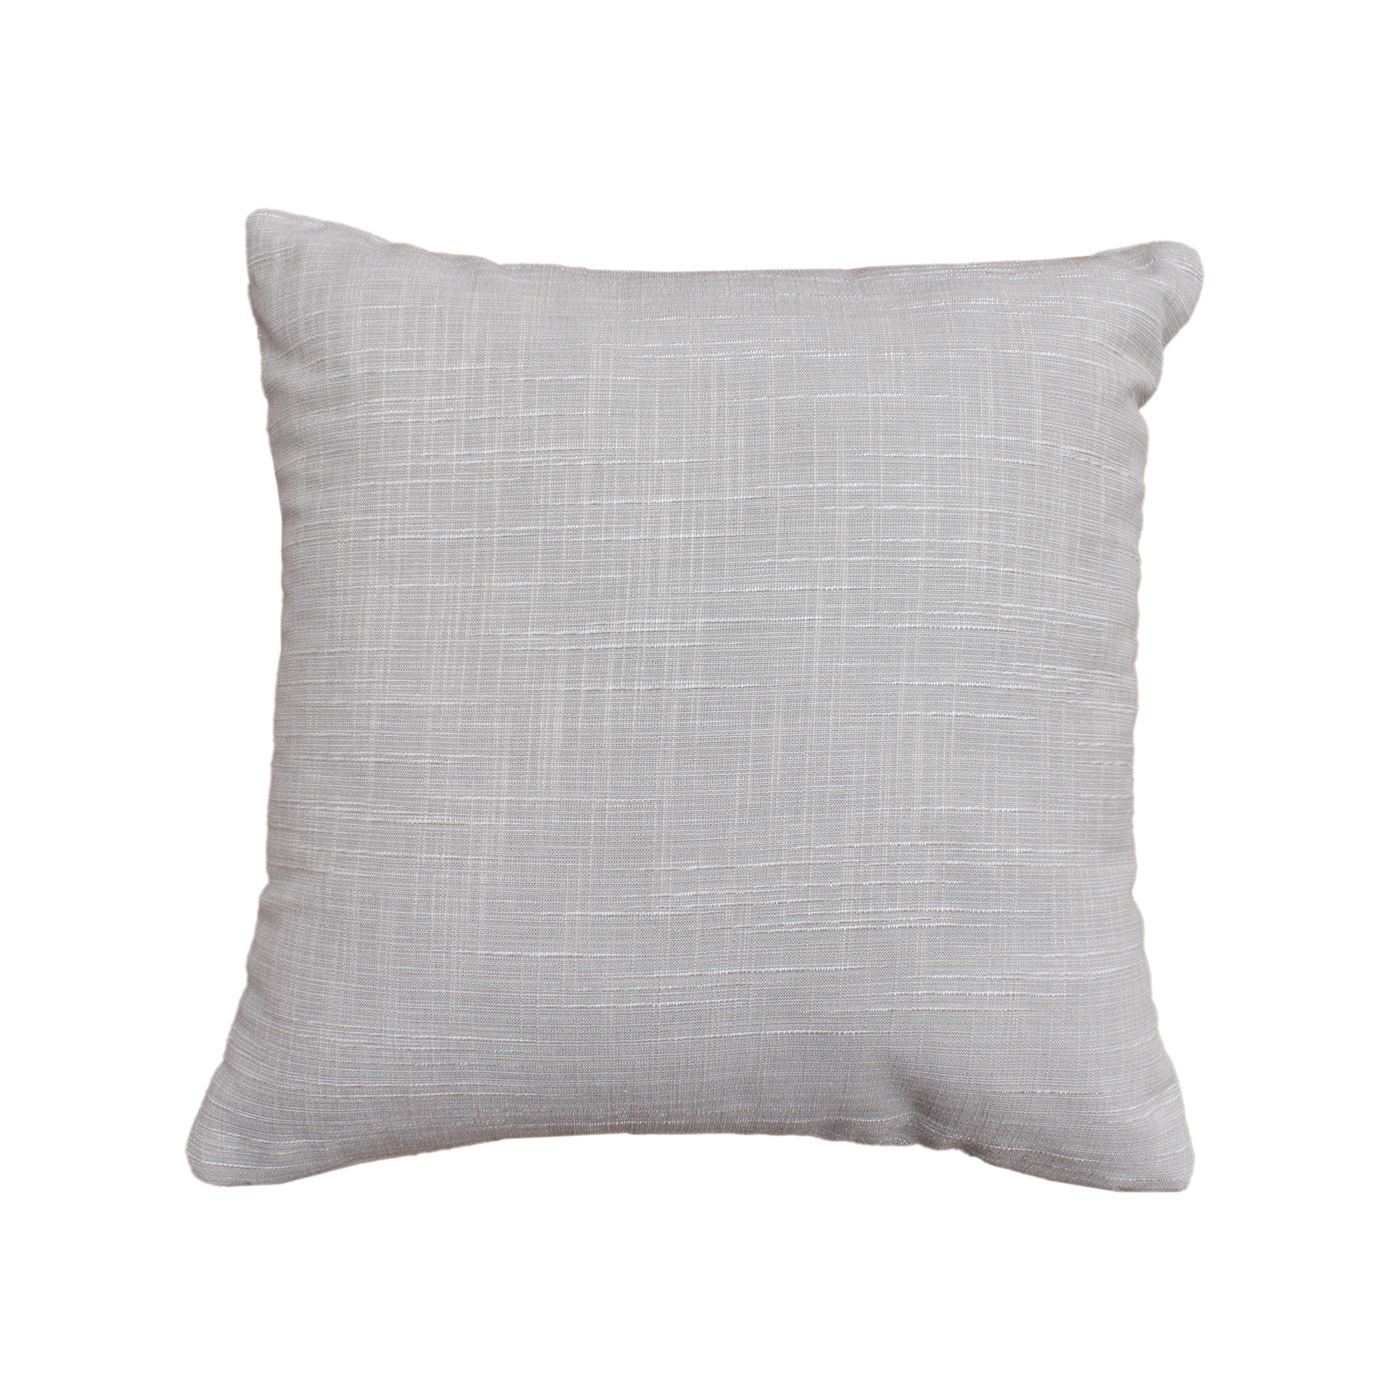 Savoca Cushion, Blended Fabric, Taupe, Machine Made, Flat Weave